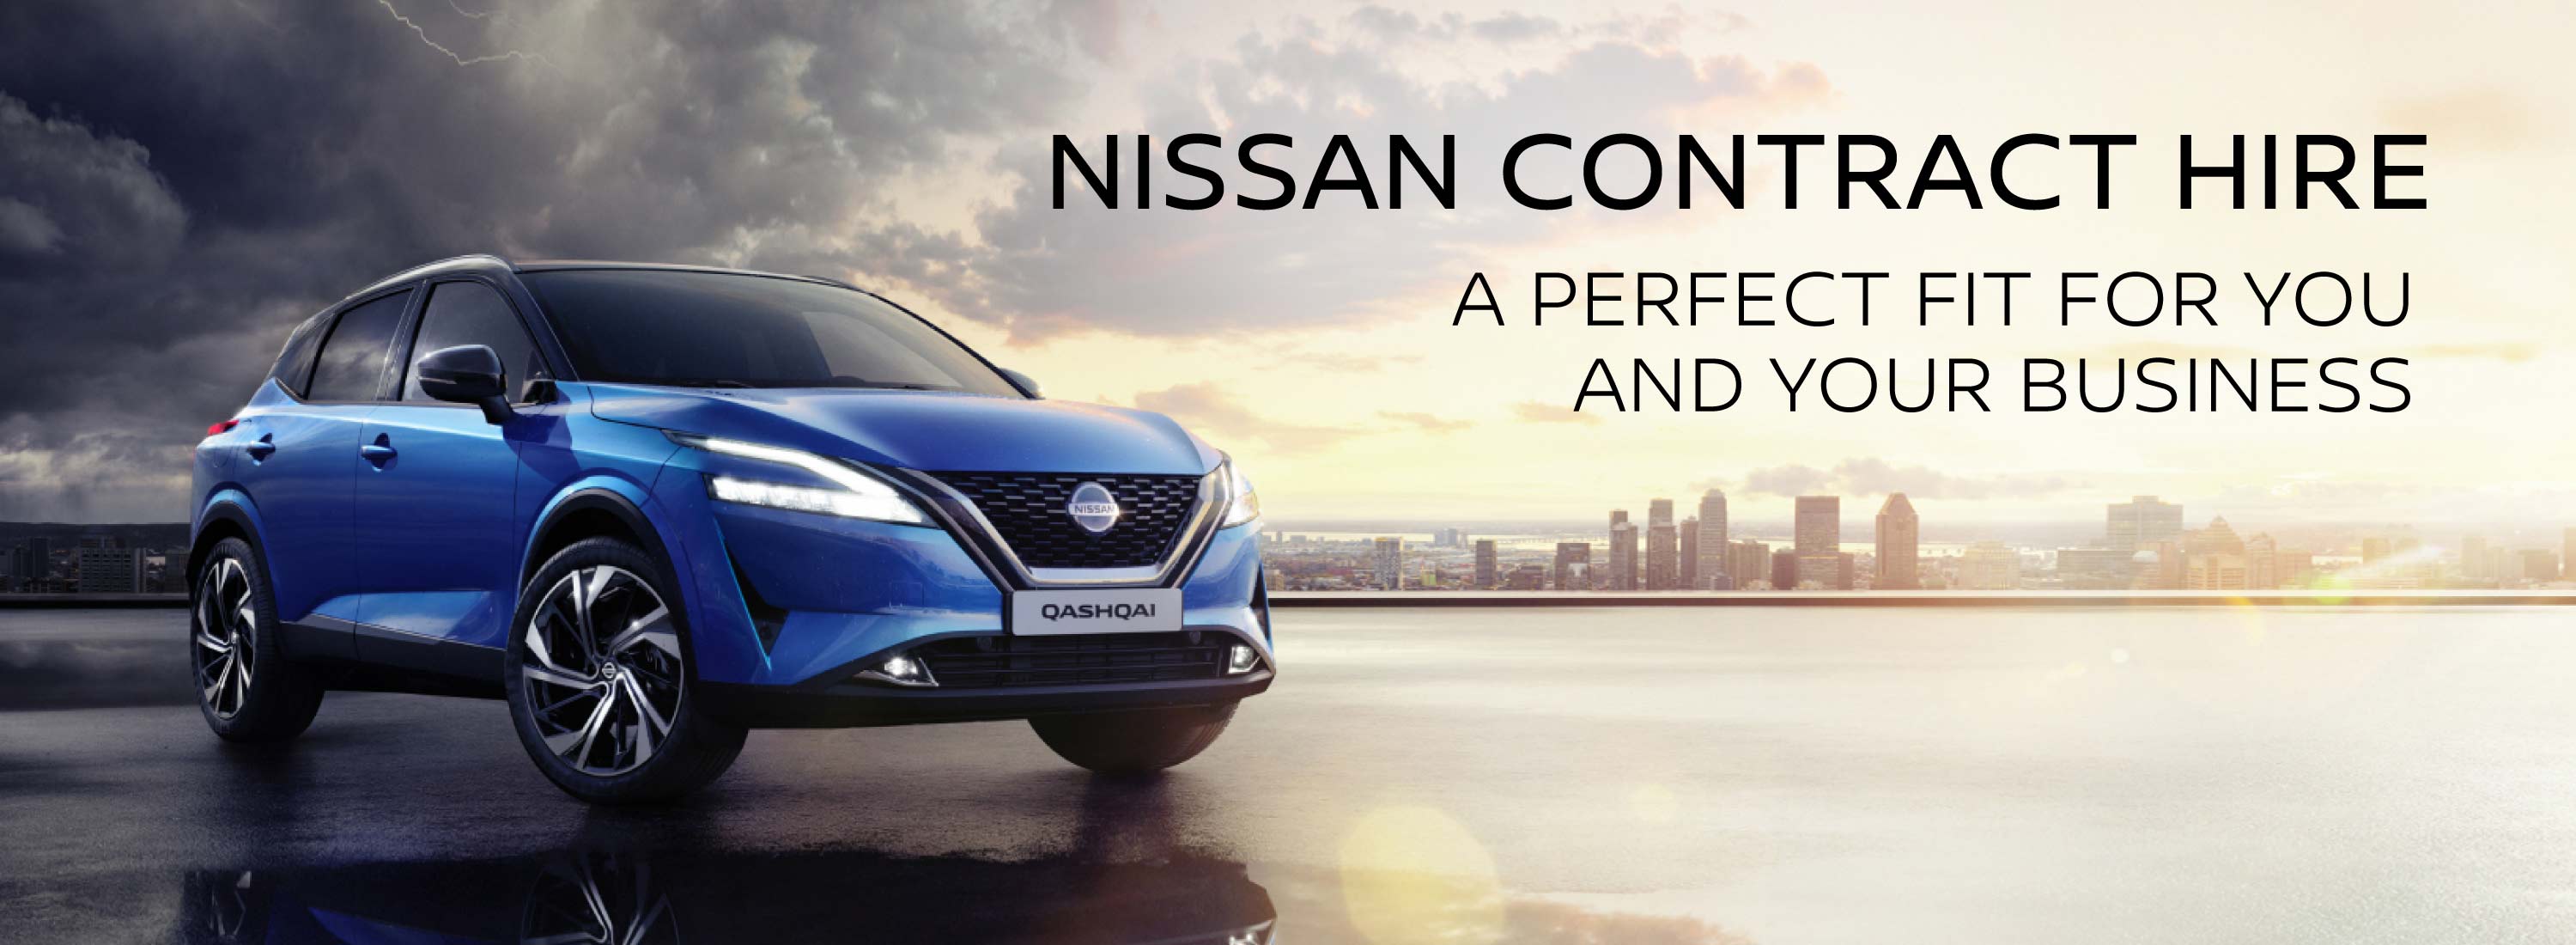 Nissan Contact Hire Banner 150621